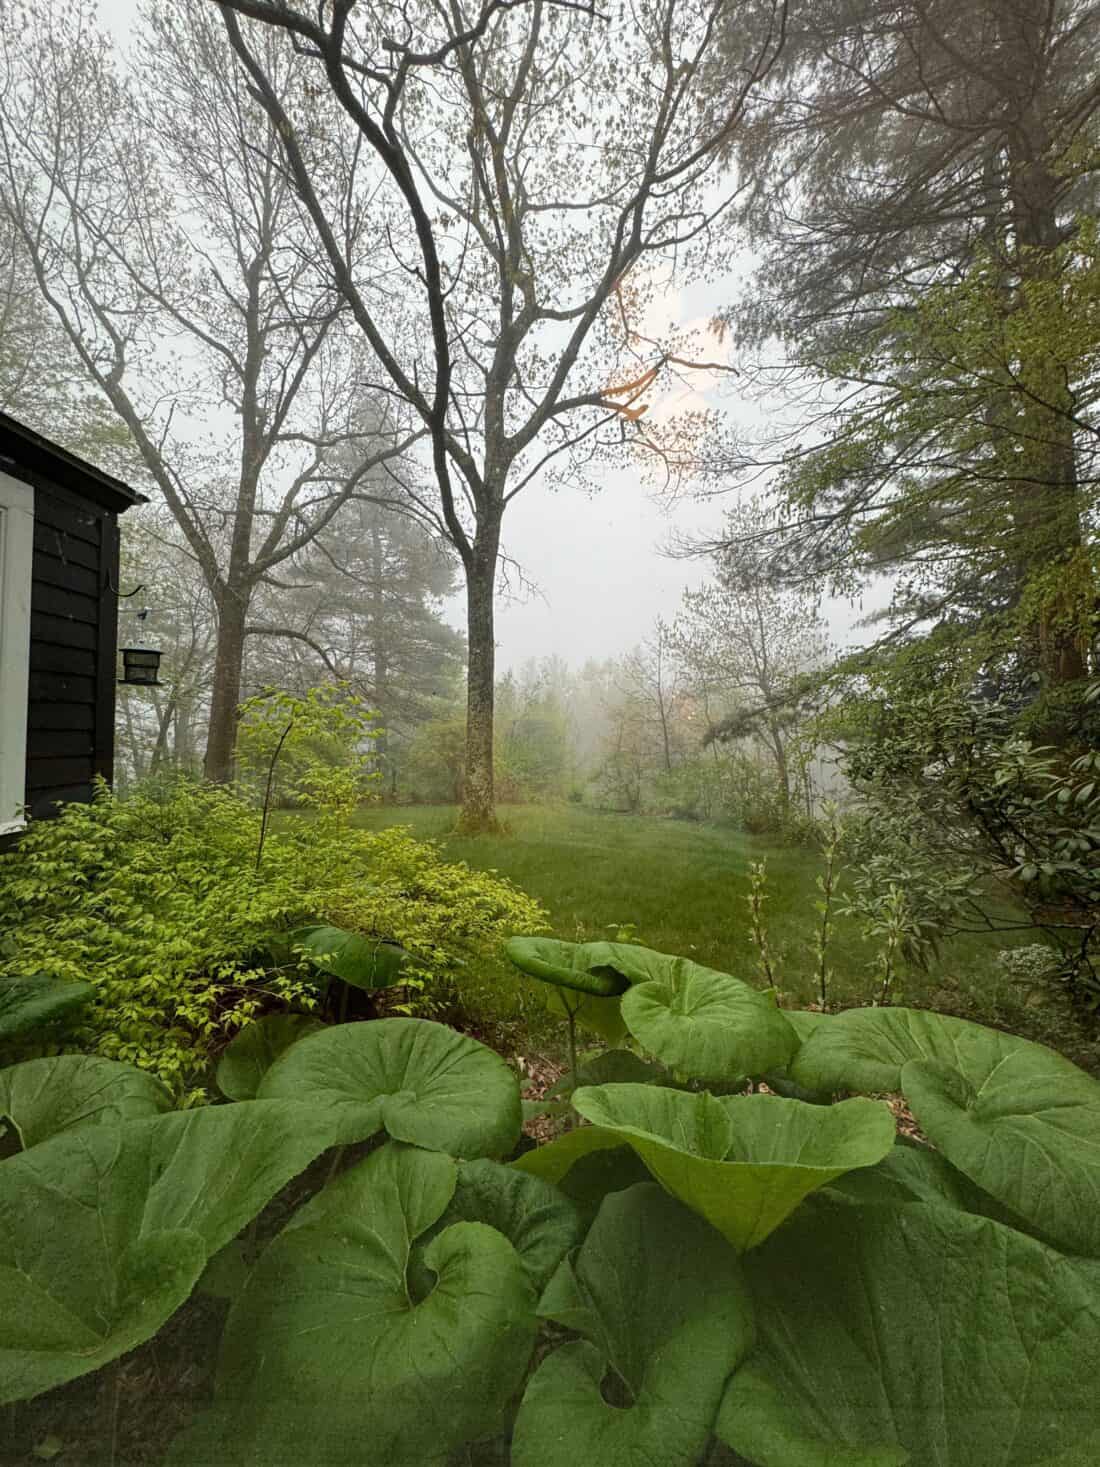 A serene outdoor scene featuring large, lush green leaves of petasites japonicus in the foreground. The background contains tall trees, partially shrouded in a light fog, with a grassy area in between. The corner of a dark-colored building is visible on the left.